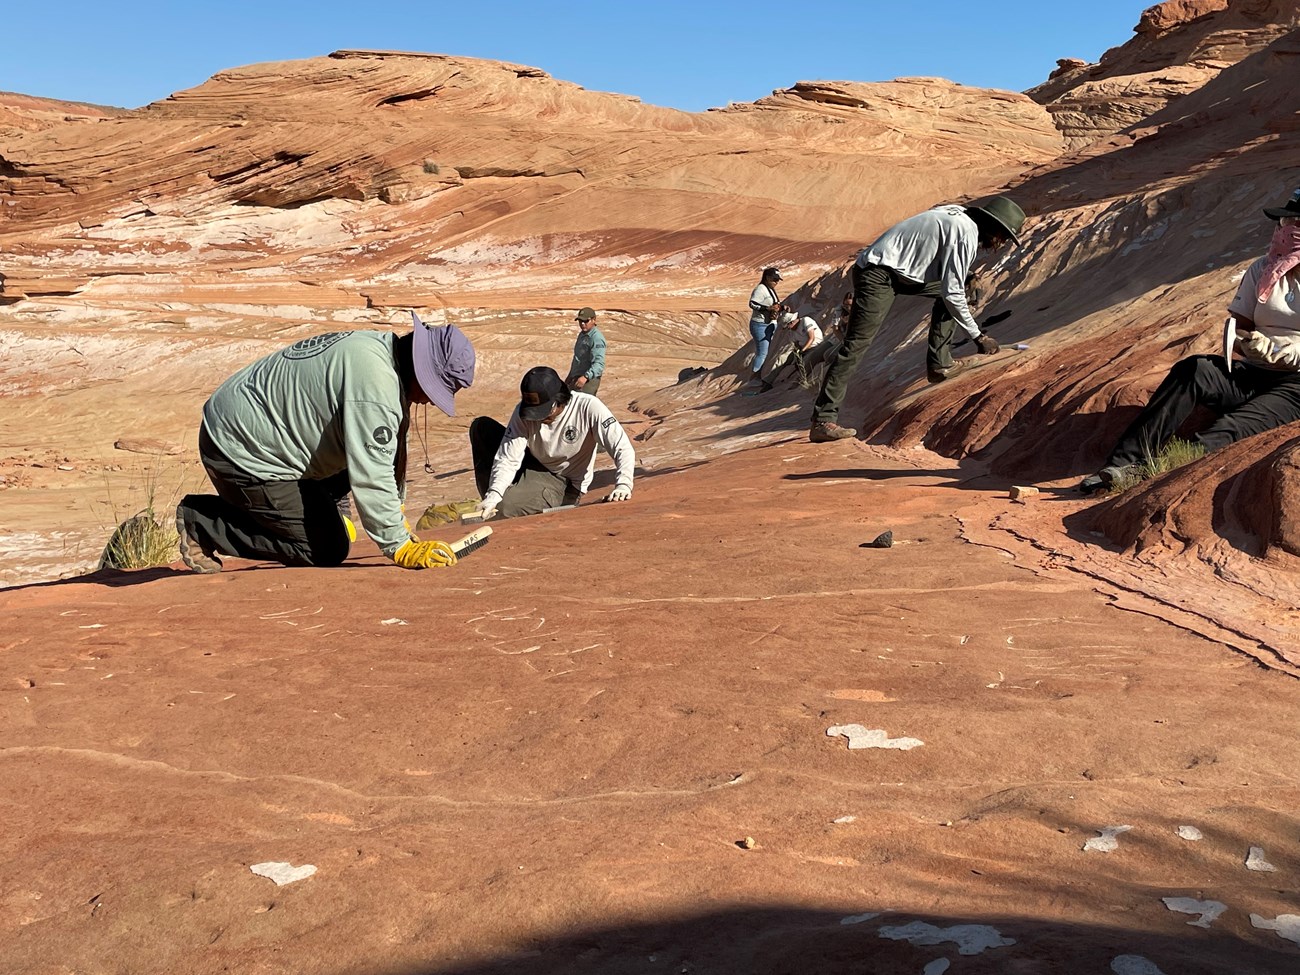 Seven people removing graffiti craved into sandstone with wire brushes, rock hammers and paint scrapers.